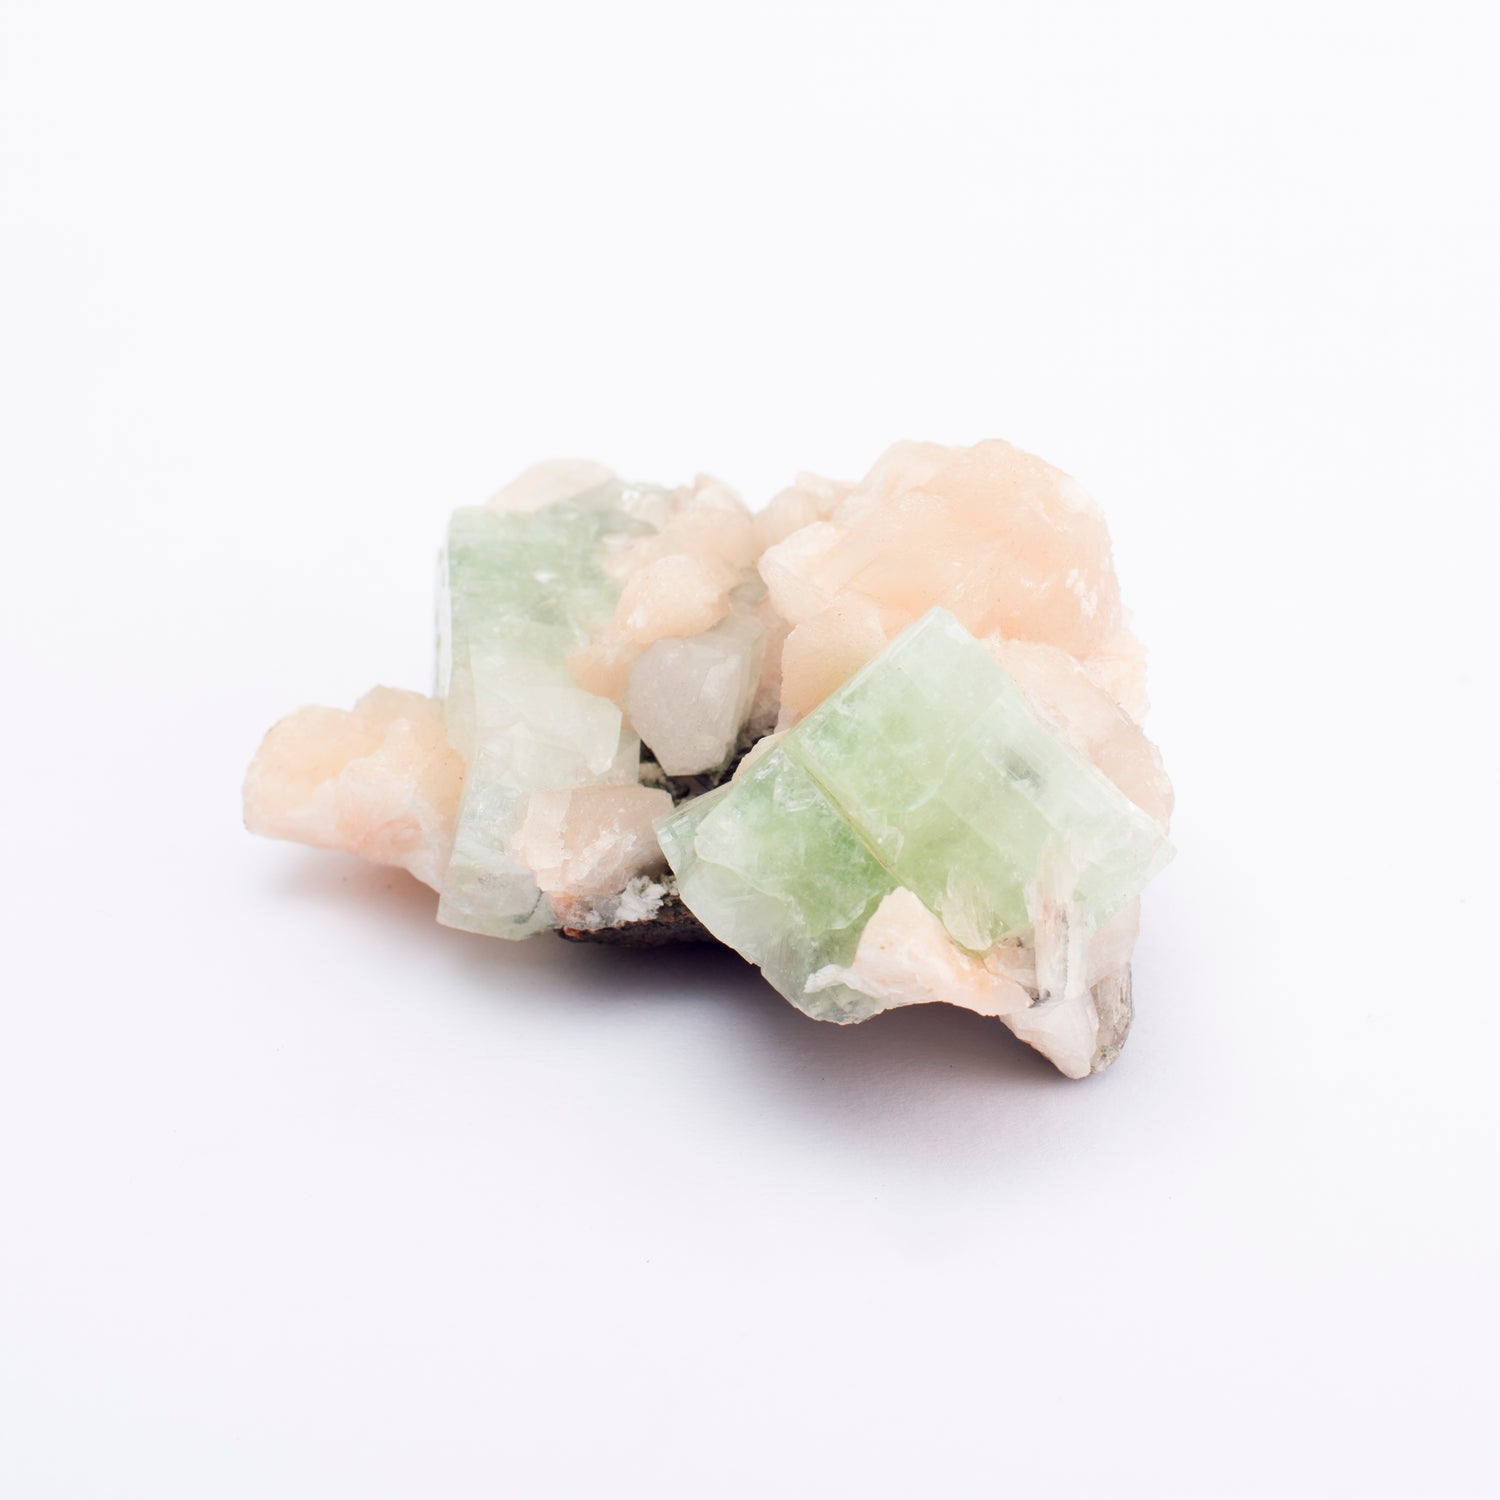 Himalayan Quartz with Apophyllite Green and Stilbite Cluster